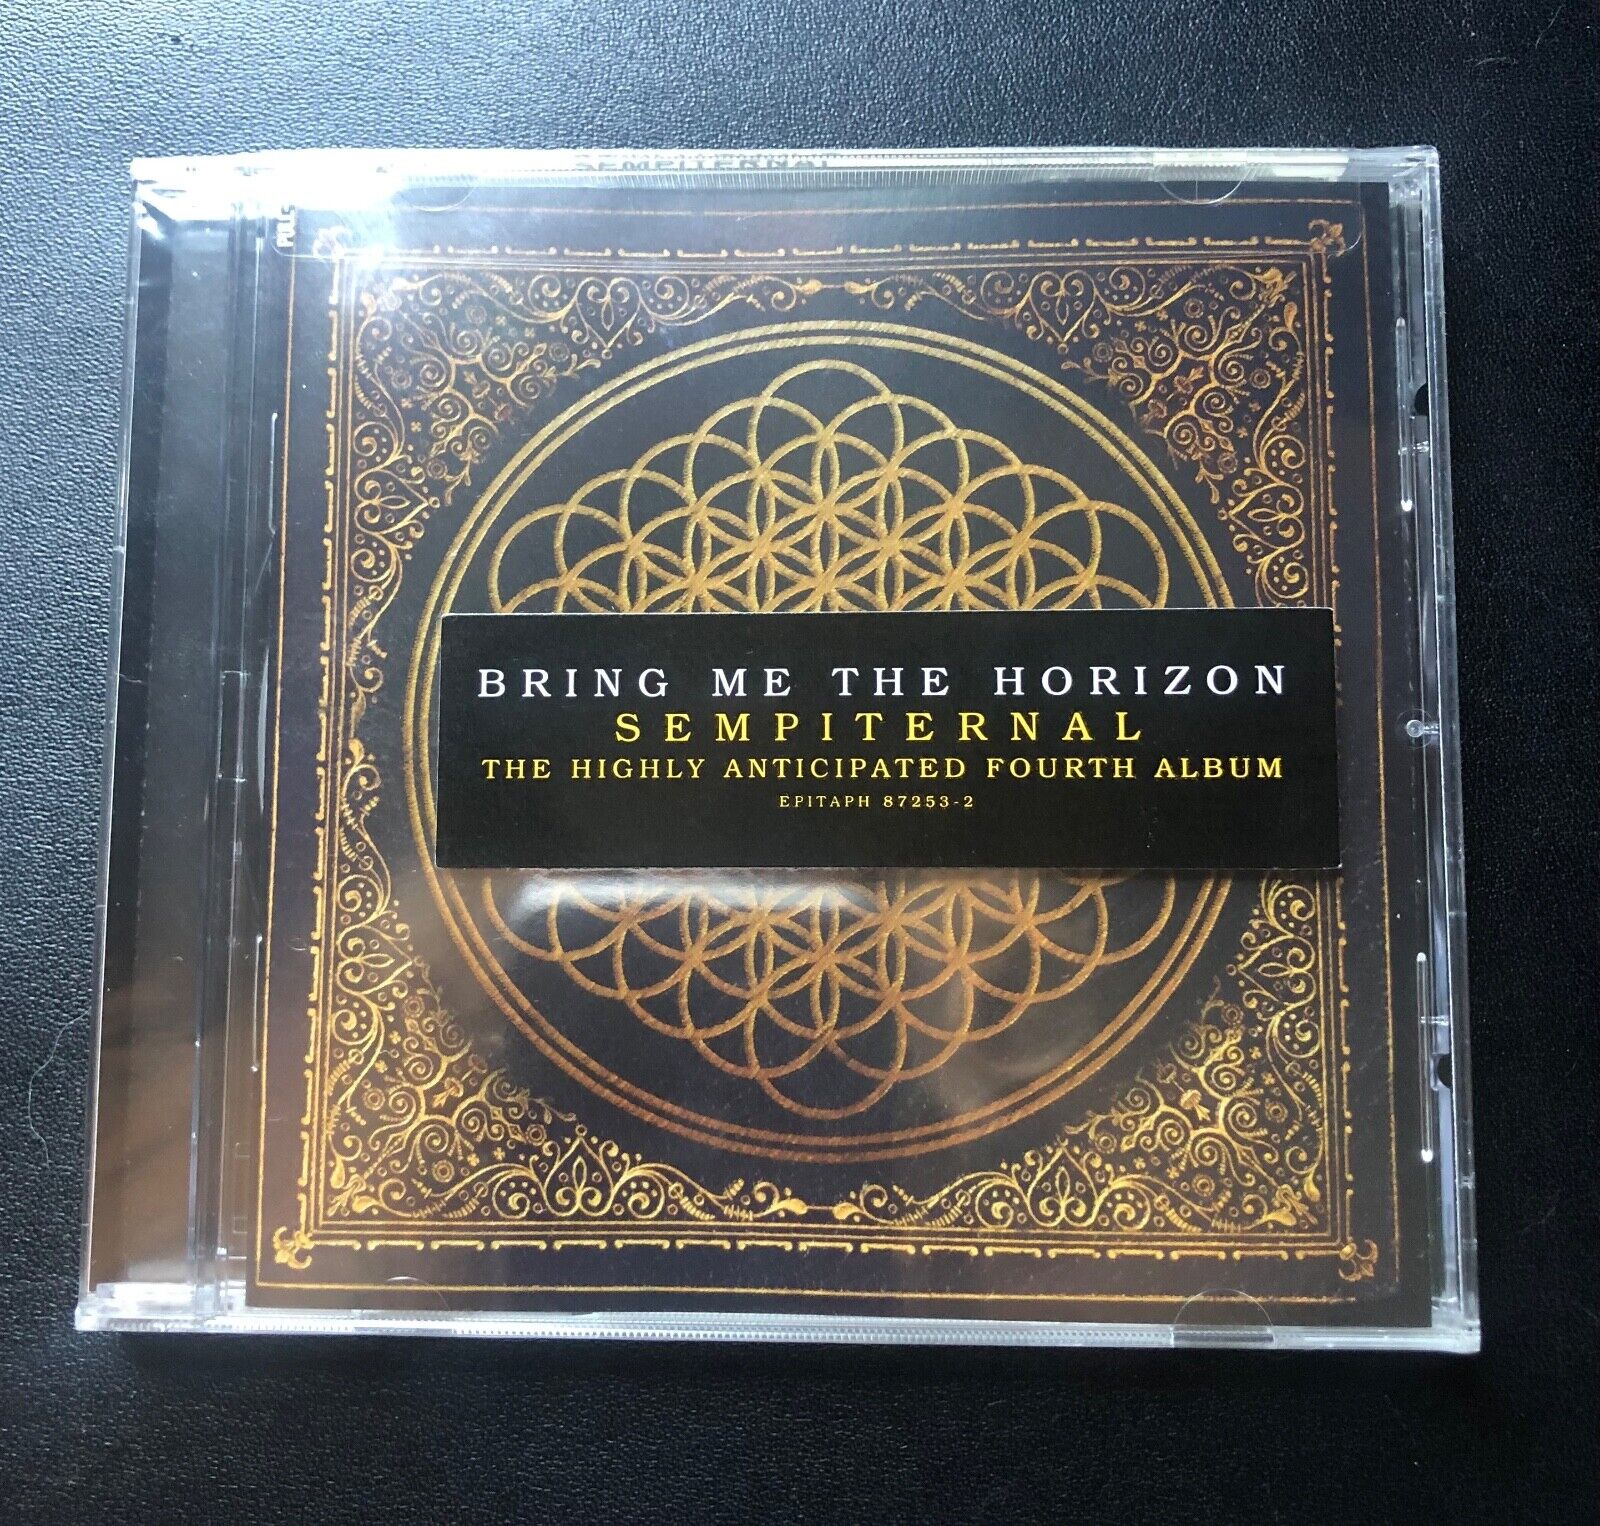 Bring Me the Horizon-Sempiternal (CD, 2013) Perfect condition- Unopened